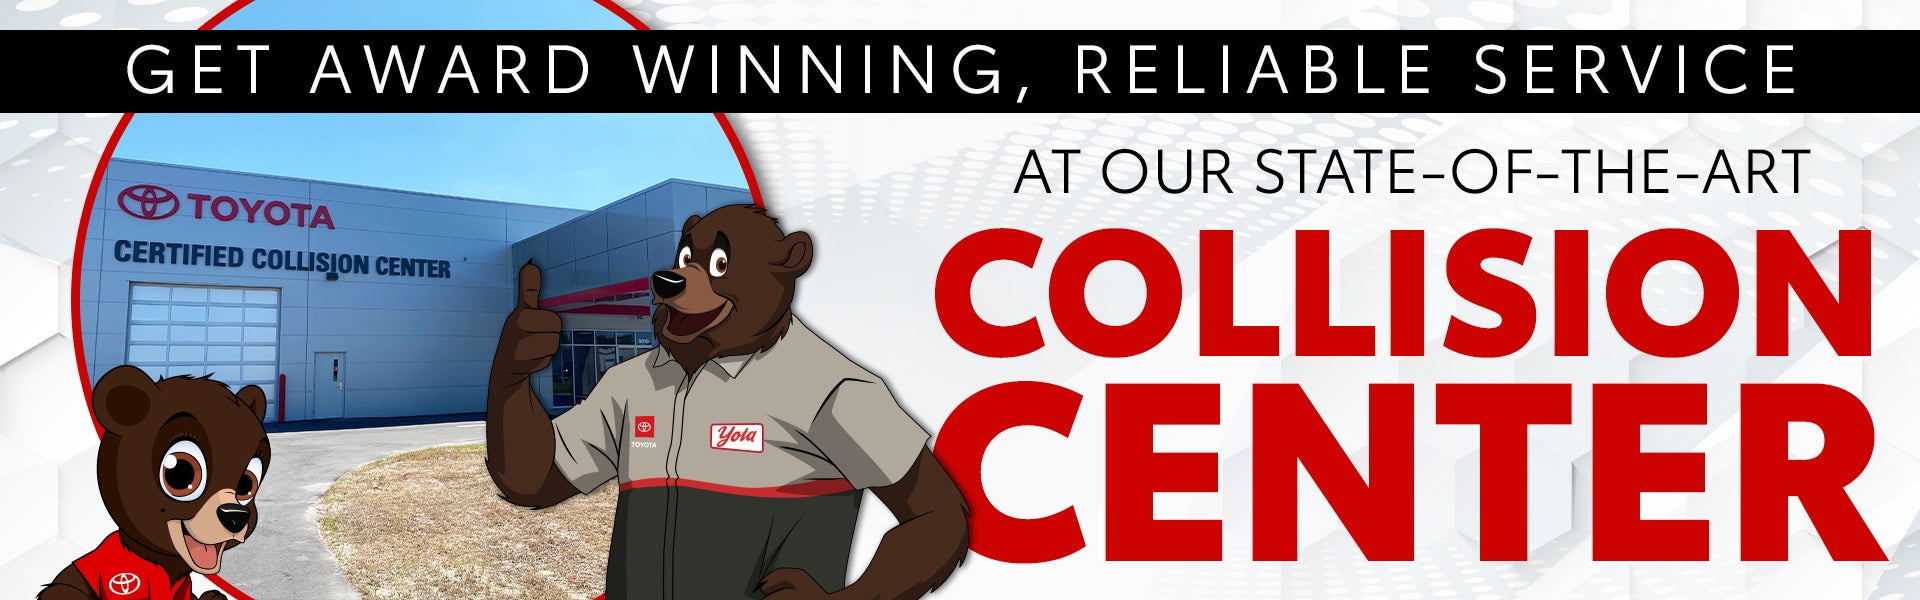 Get Award Winning, Reliable Service at our State of the Art Collision Center